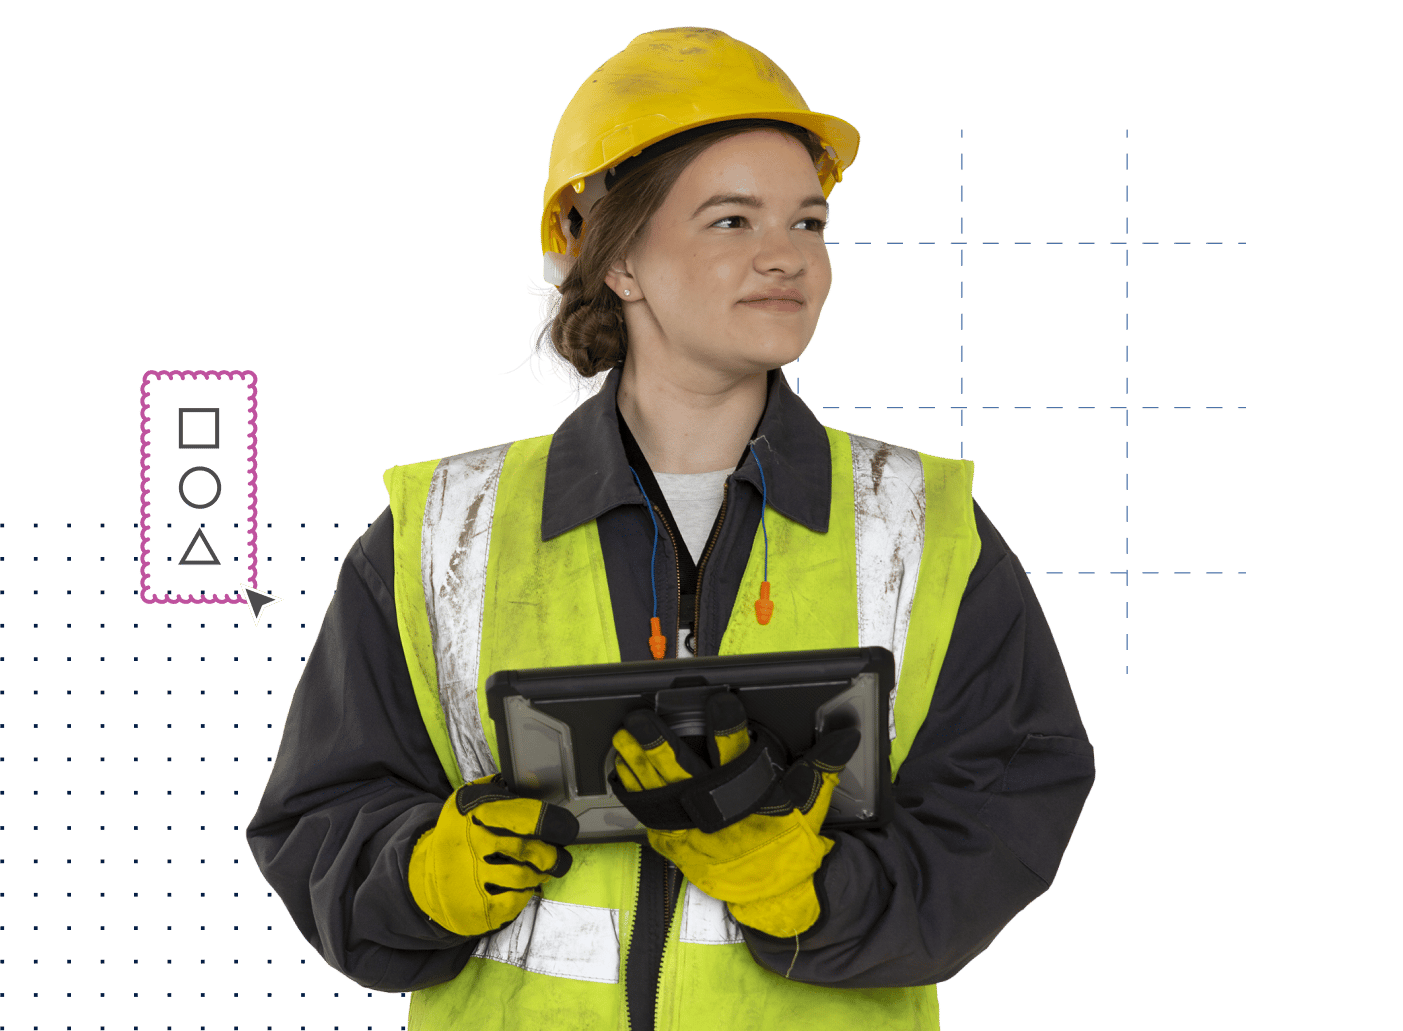 woman construction worker subcontractor wearing vest, hardhat, gloves and holding a tablet